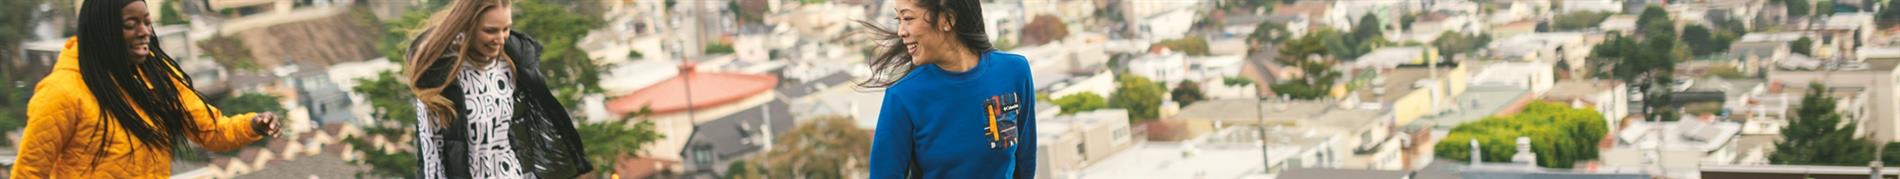 DC Shoes Women's Winter Lifestyle Clothing 